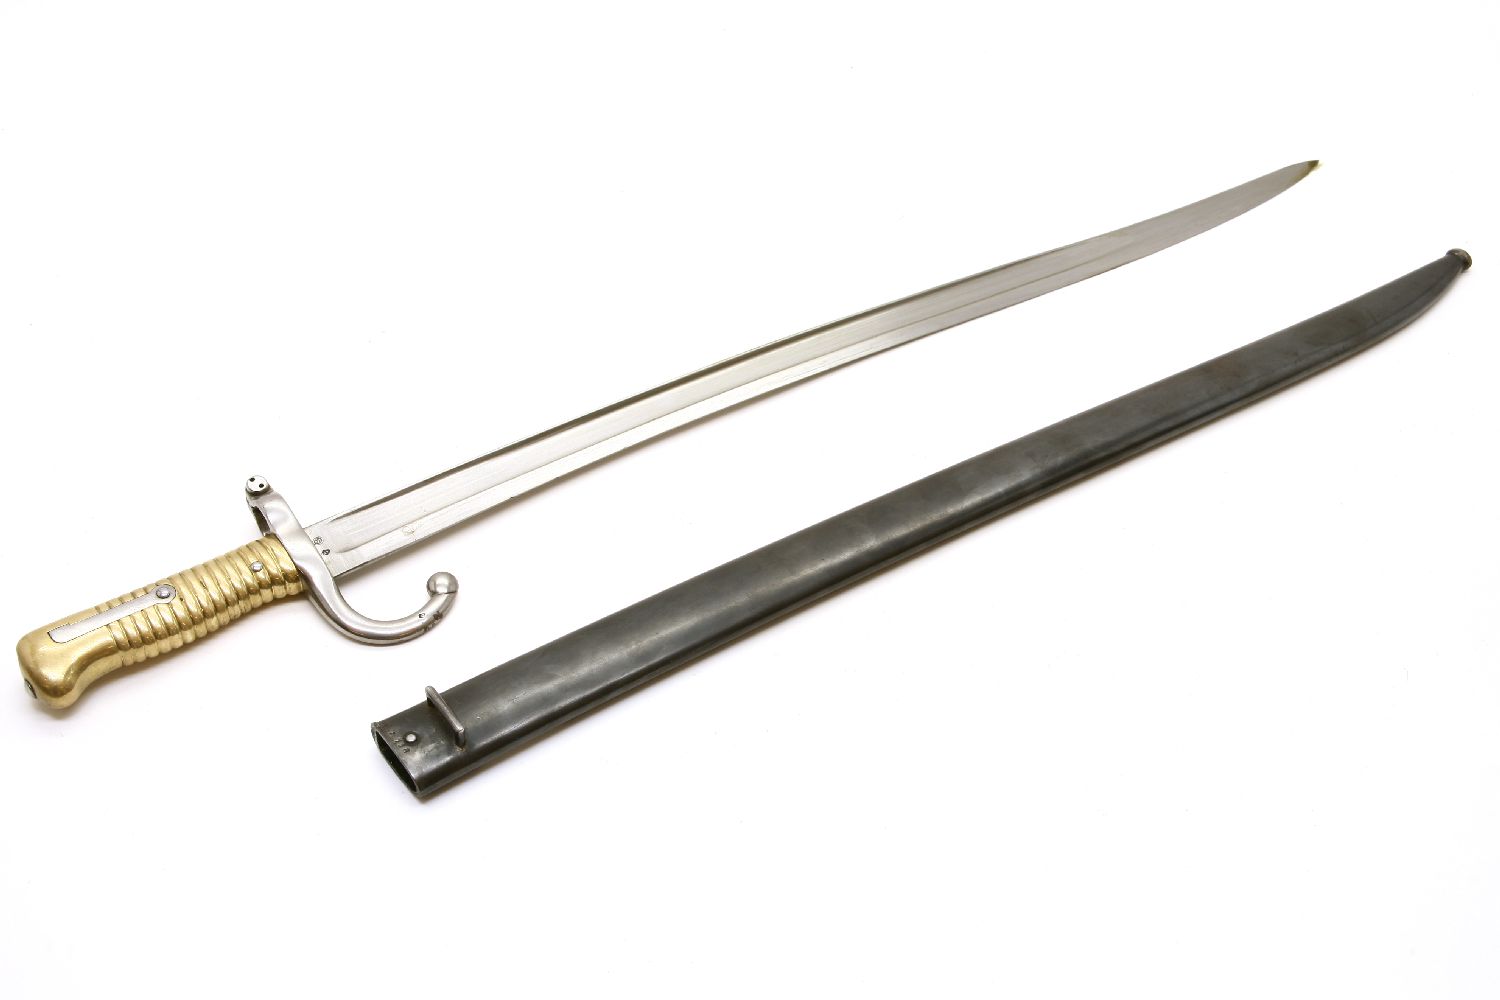 A French Chassepot bayonet and scabbard, inscribed ' Mre D'Armes de Chat Janvier 1872. 71cm long